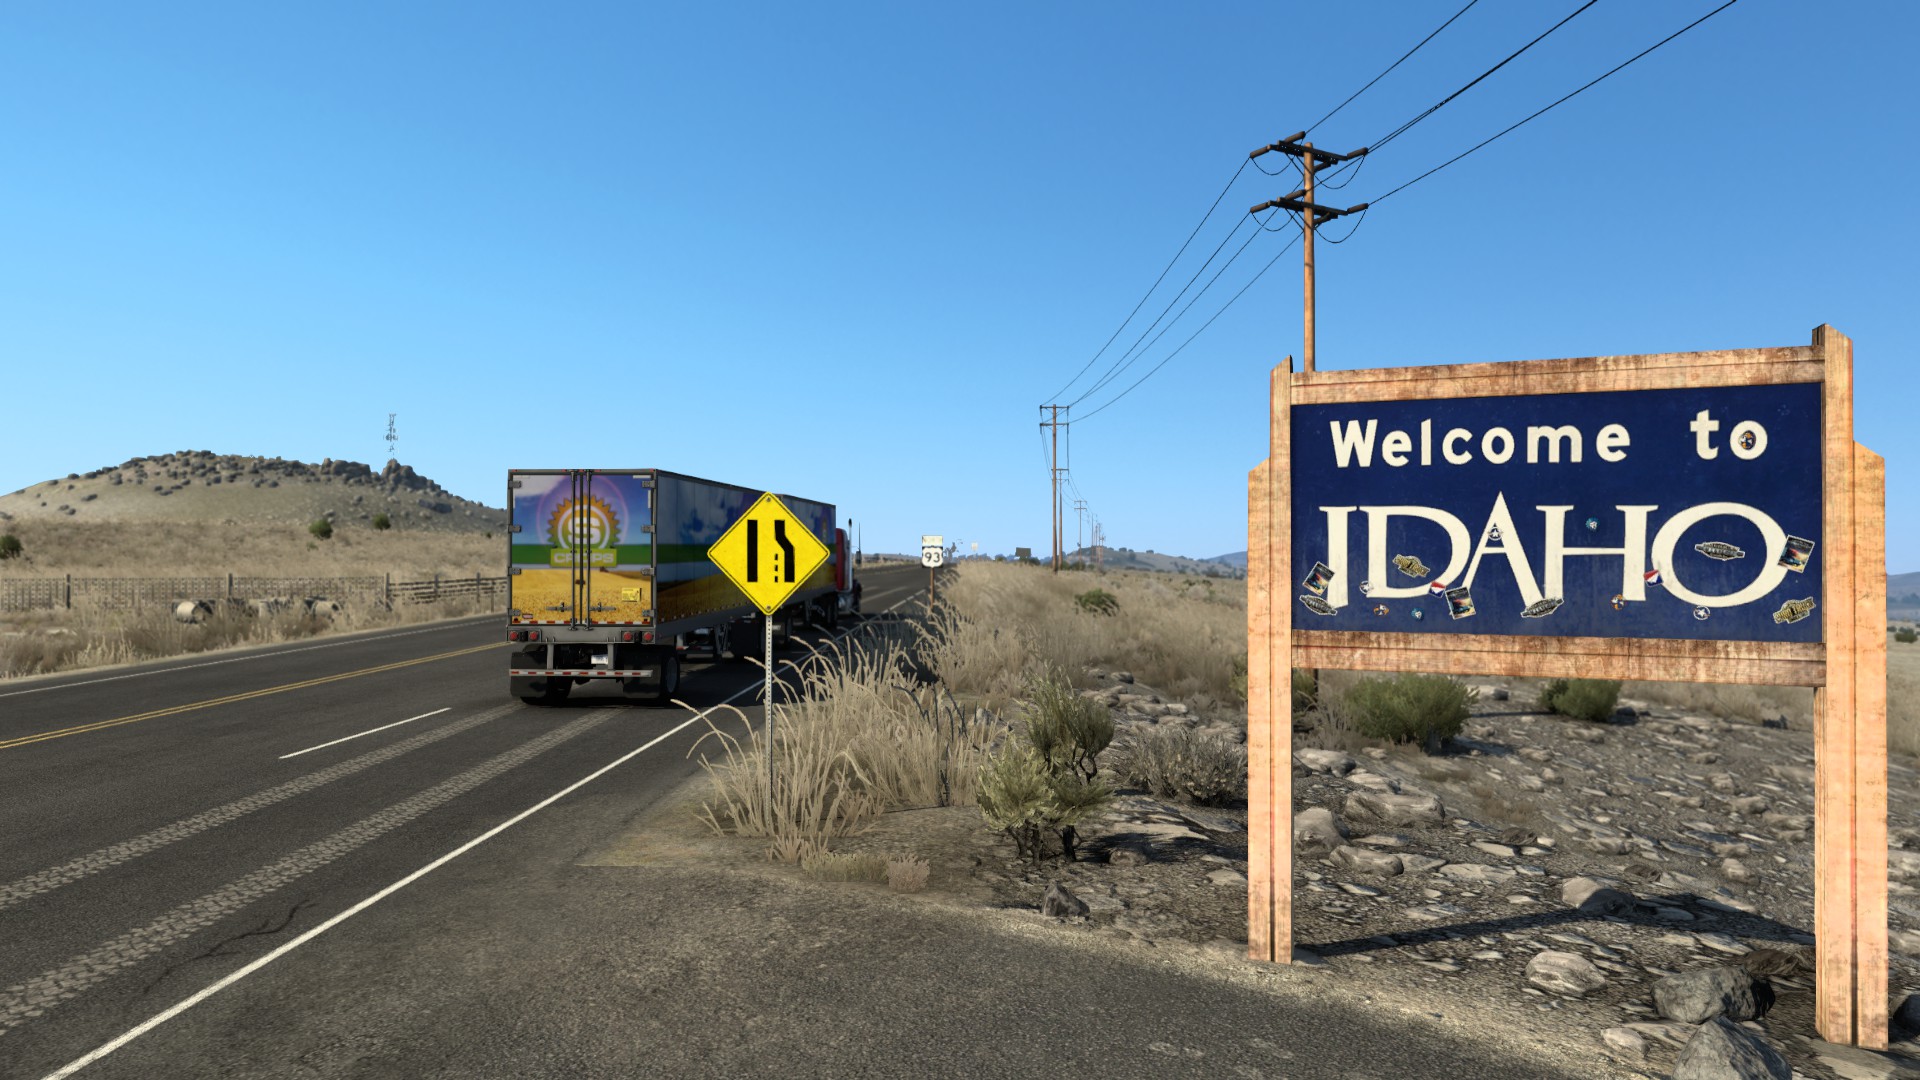 Screenshot of truck passing by a Welcome to Idaho sign